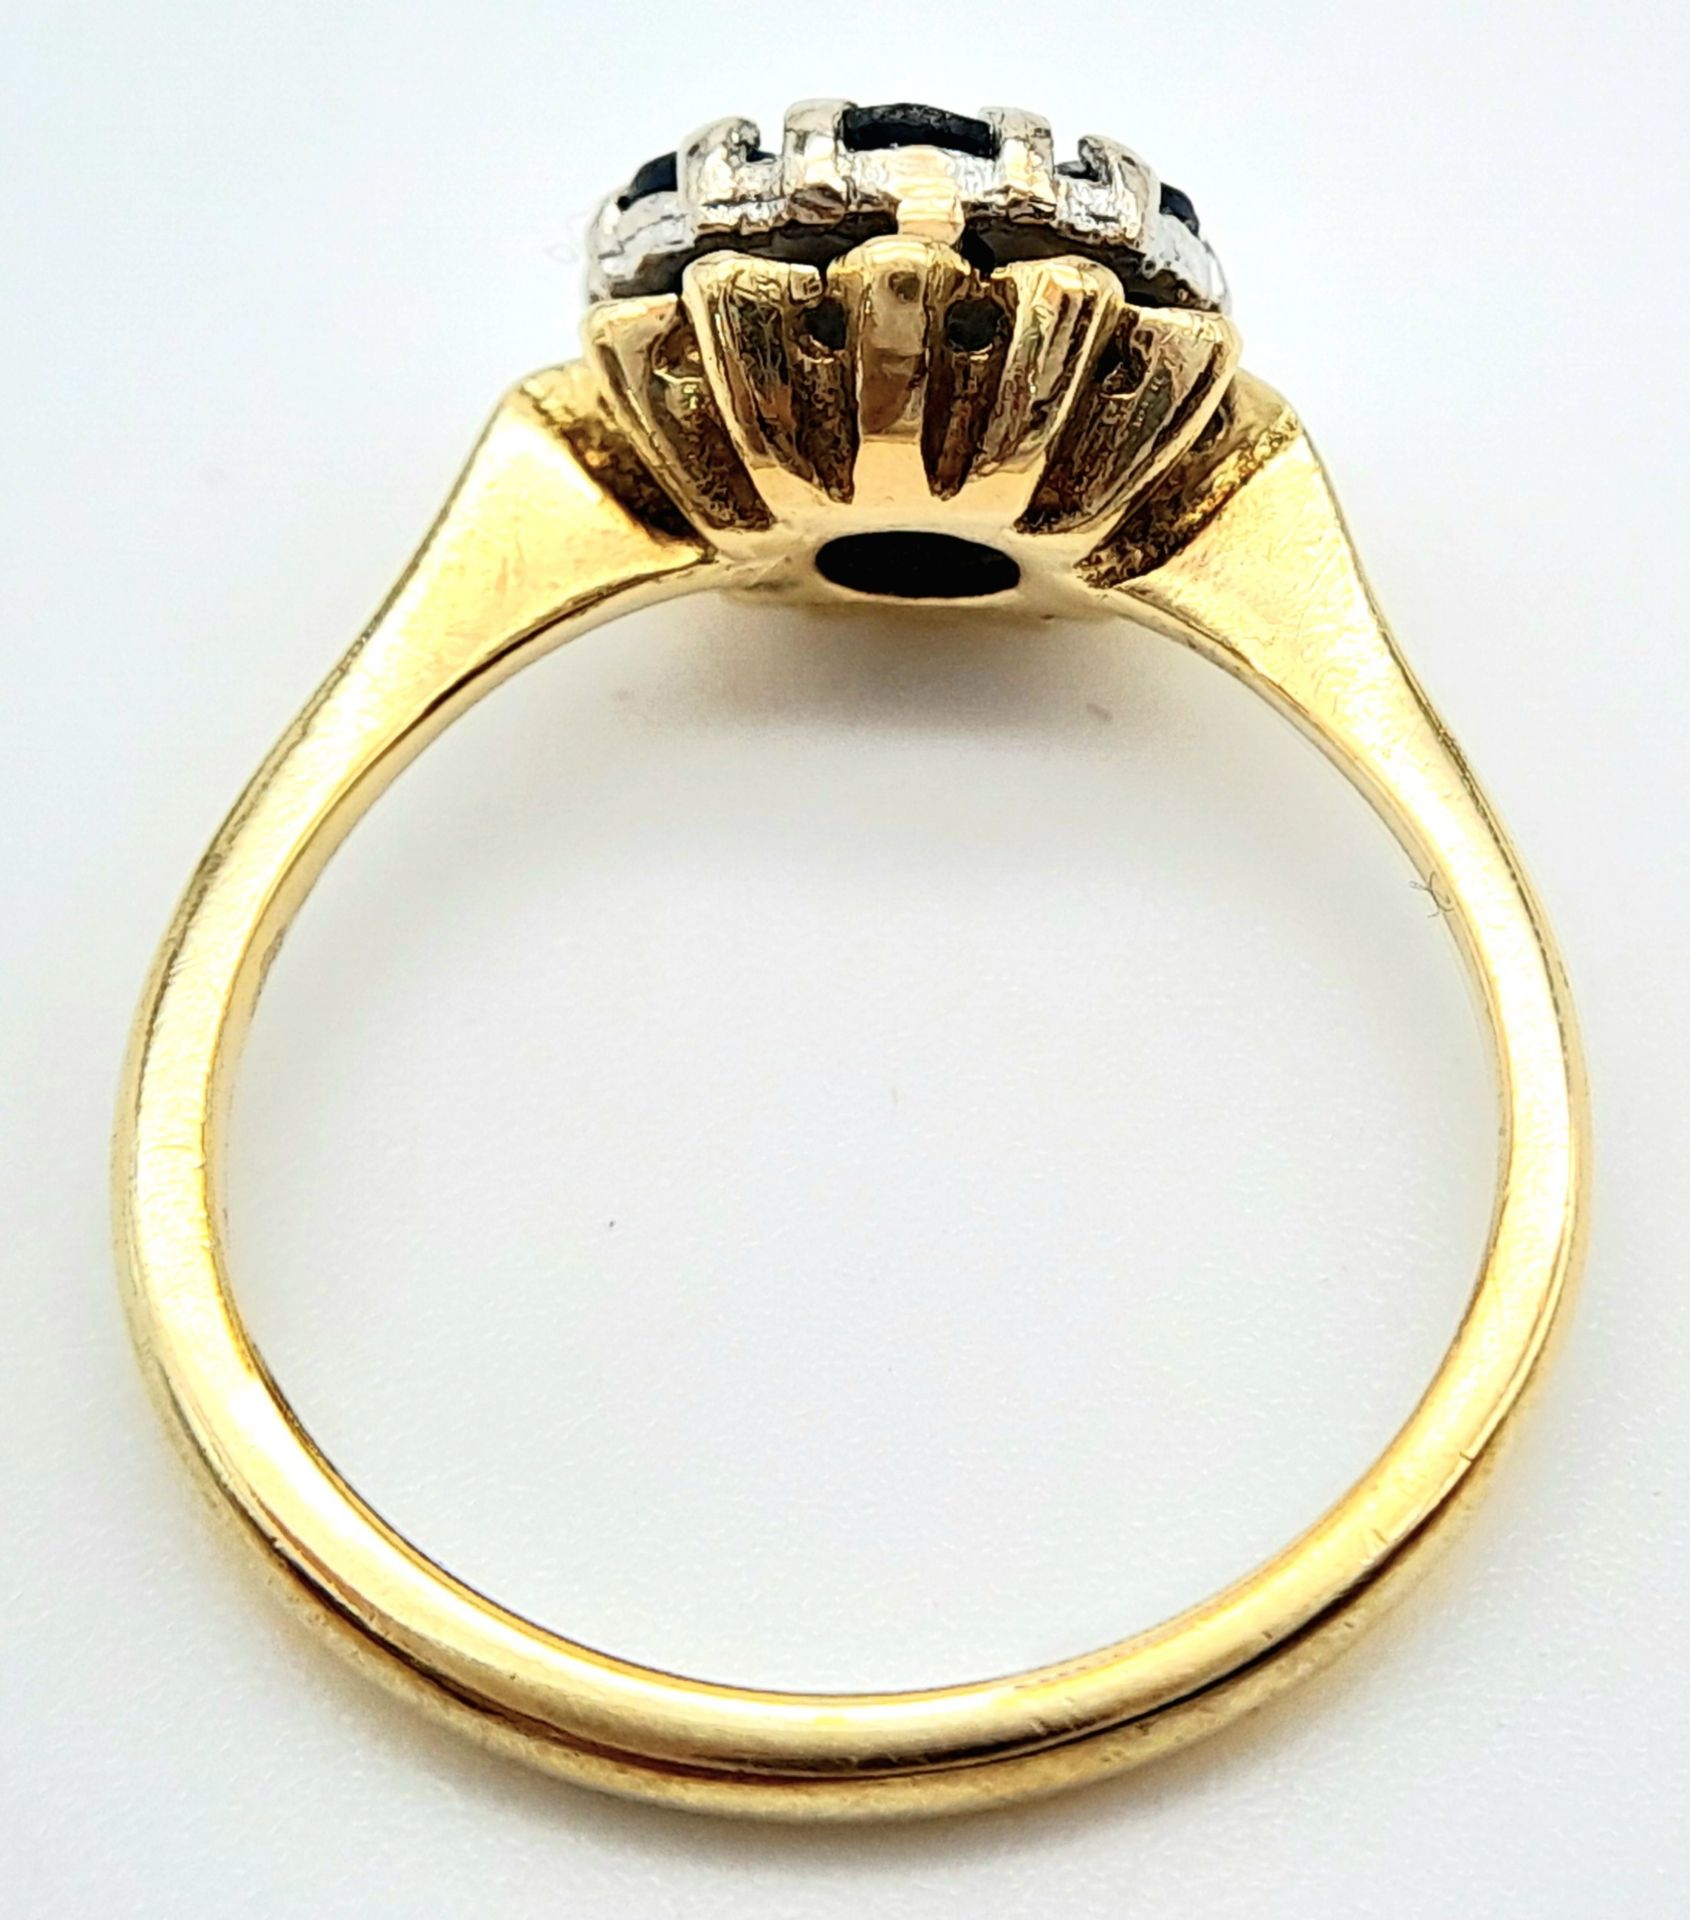 AN 18K YELLOW GOLD VINTAGE DIAMOND & SAPPHIRE RING. Size K, 3.5g total weight. Ref: SC 8070 - Image 5 of 6